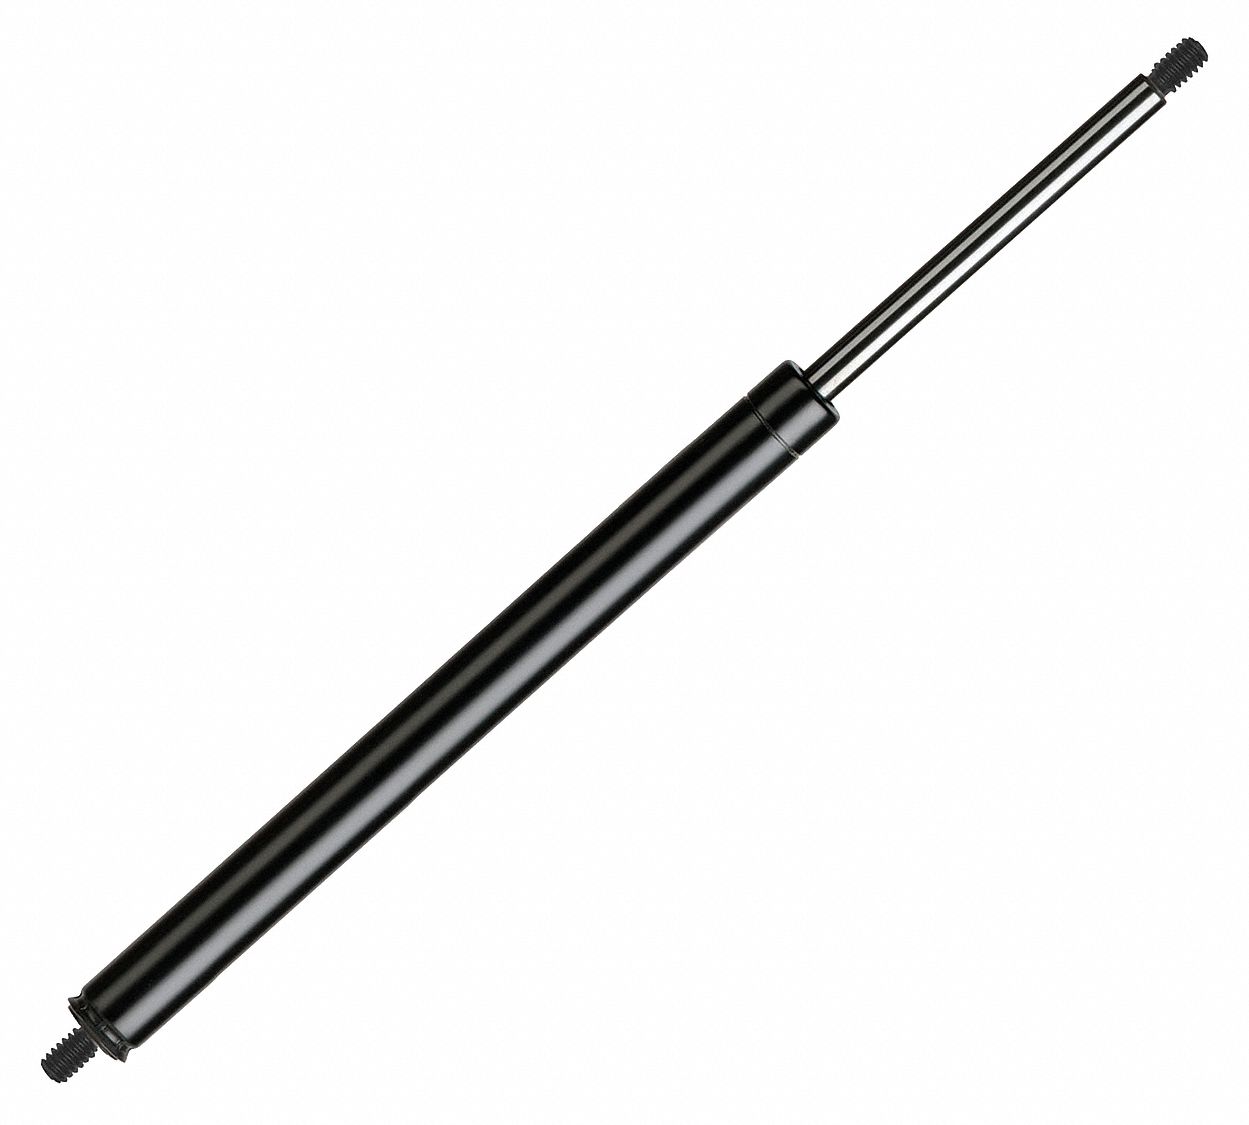 Extension Strut: Mechanical Traction, 9 to 27 lb, Carbon Steel, M6x1.0 Rod Thread Size